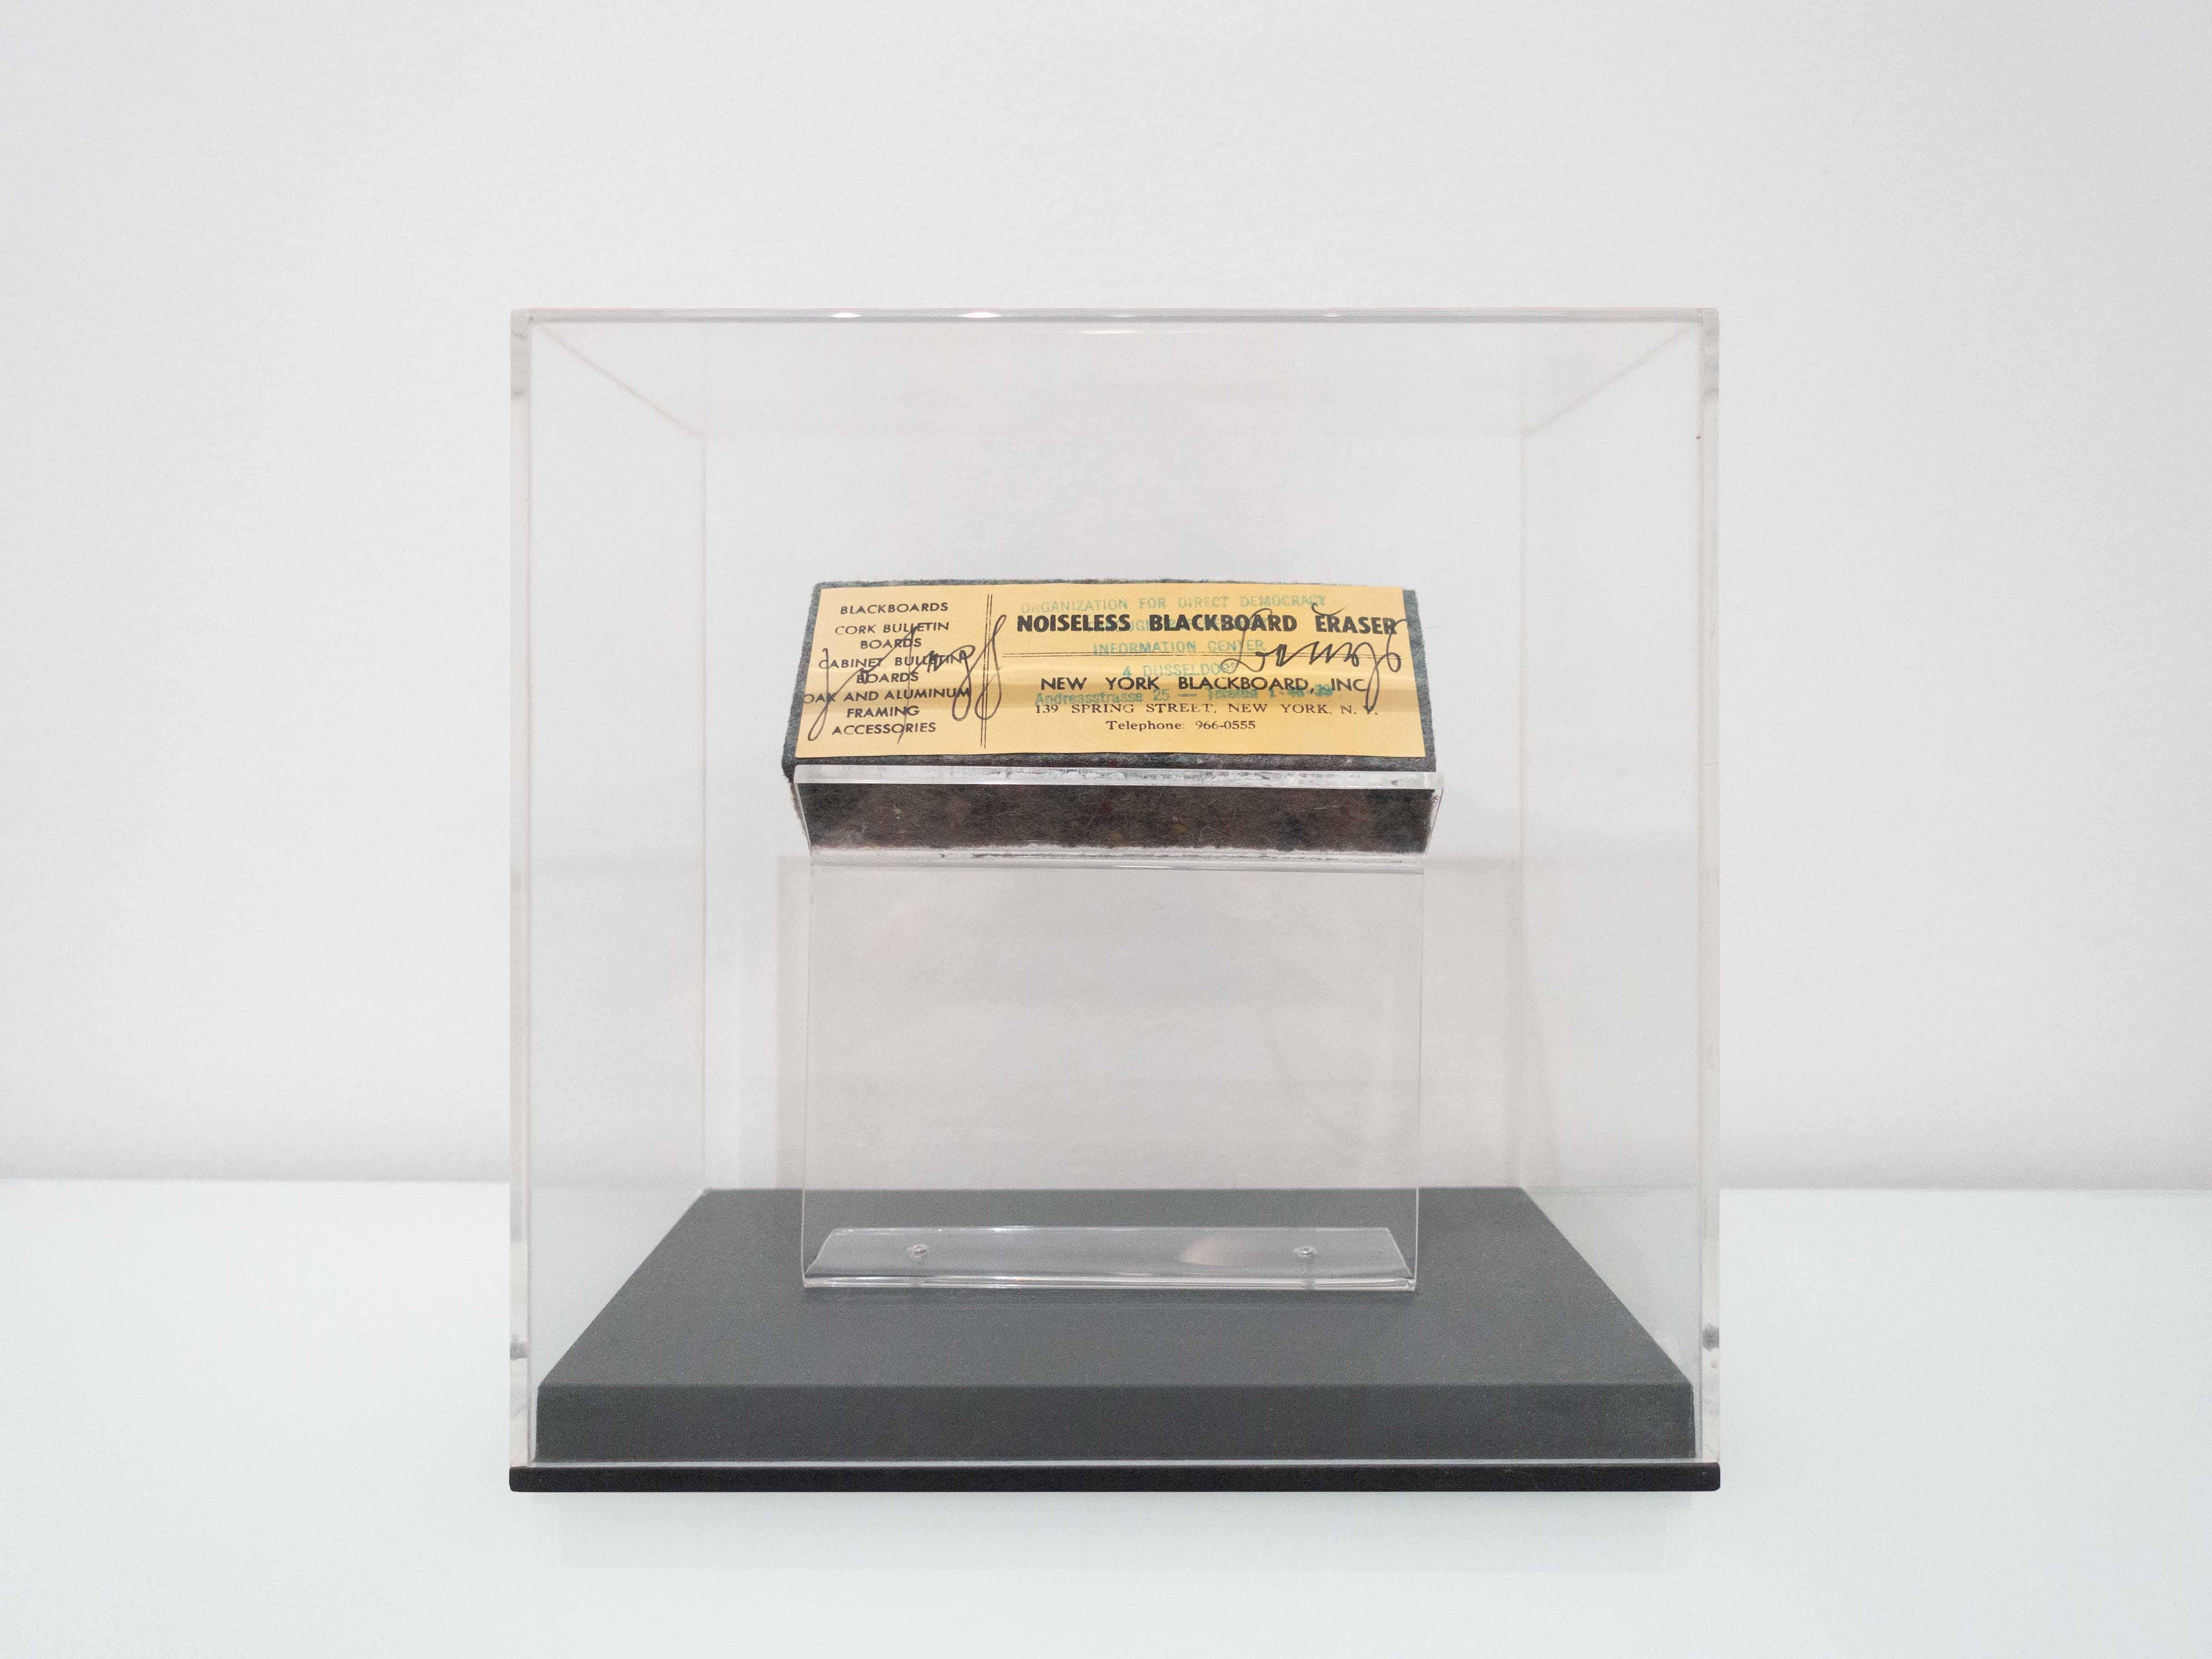 Joseph Beuys
Silent chalkboard eraser
1974
felt chalkboard eraser with stamp additions
Published by Ronald Feldman Fine Arts, Inc., New York.
Measurements of the work: 2.5 x 12.6 x 5 cm
Box size: 20.5 x 20.8 x 13 cm
Prototype edition of 550.
Signed